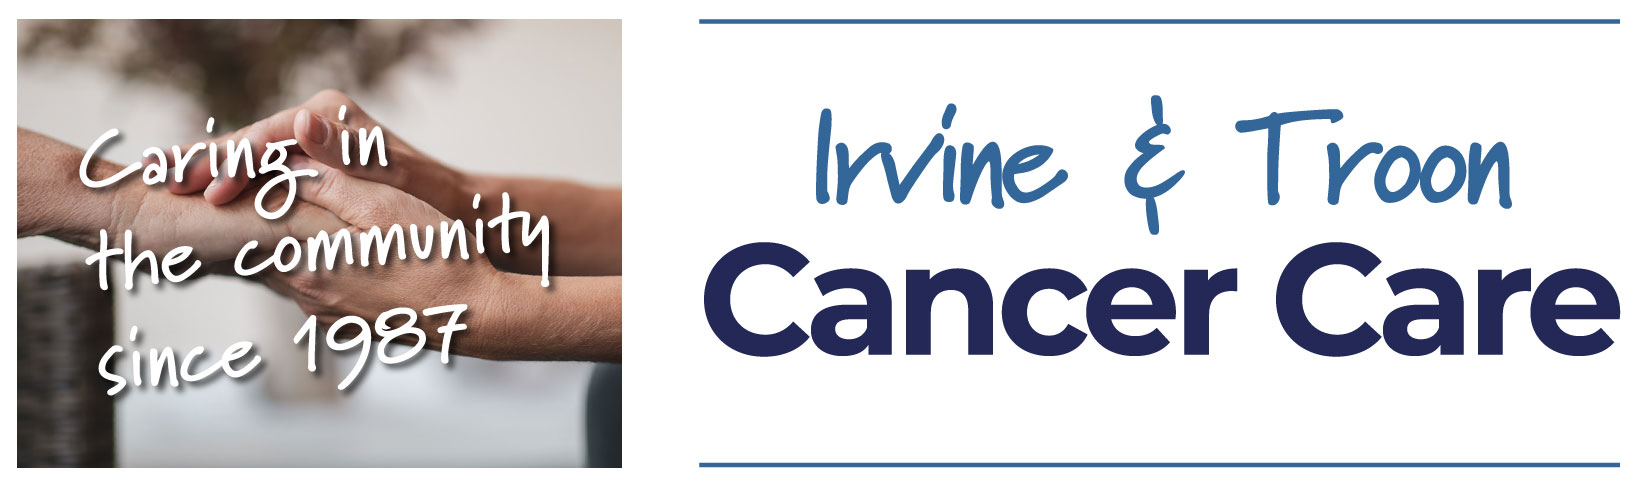 Irvine and Troon Cancer Care